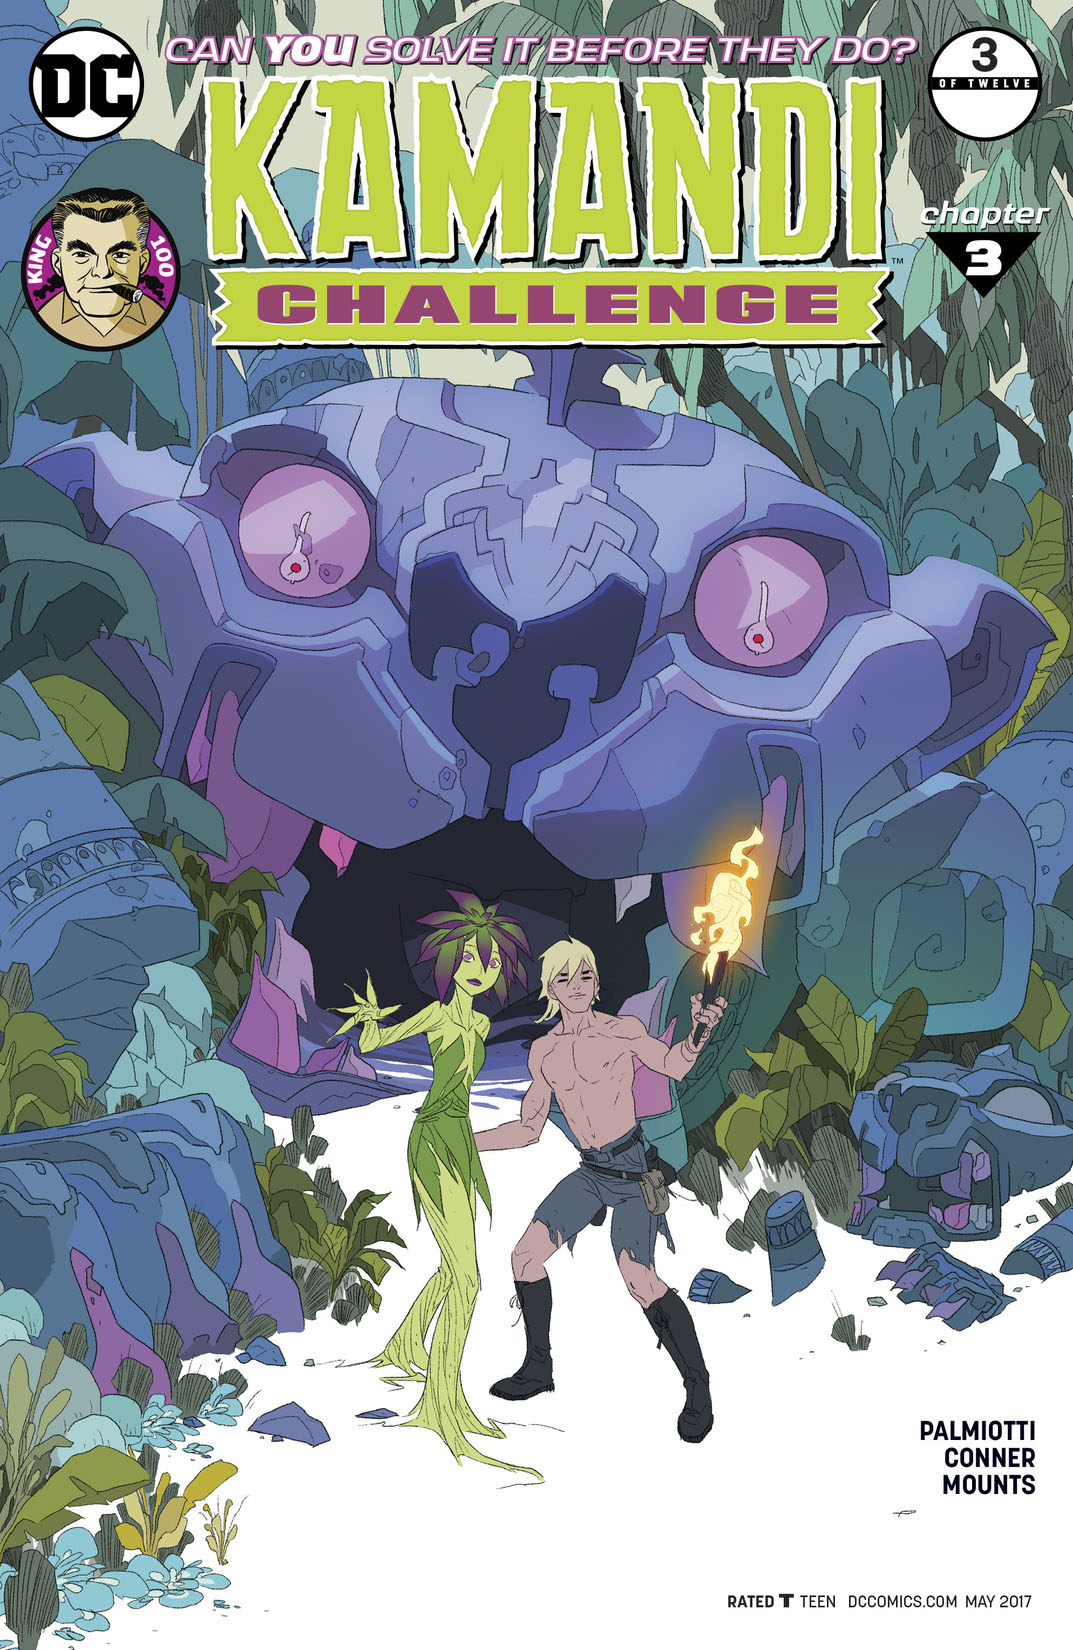 The Kamandi Challenge #3 preview images